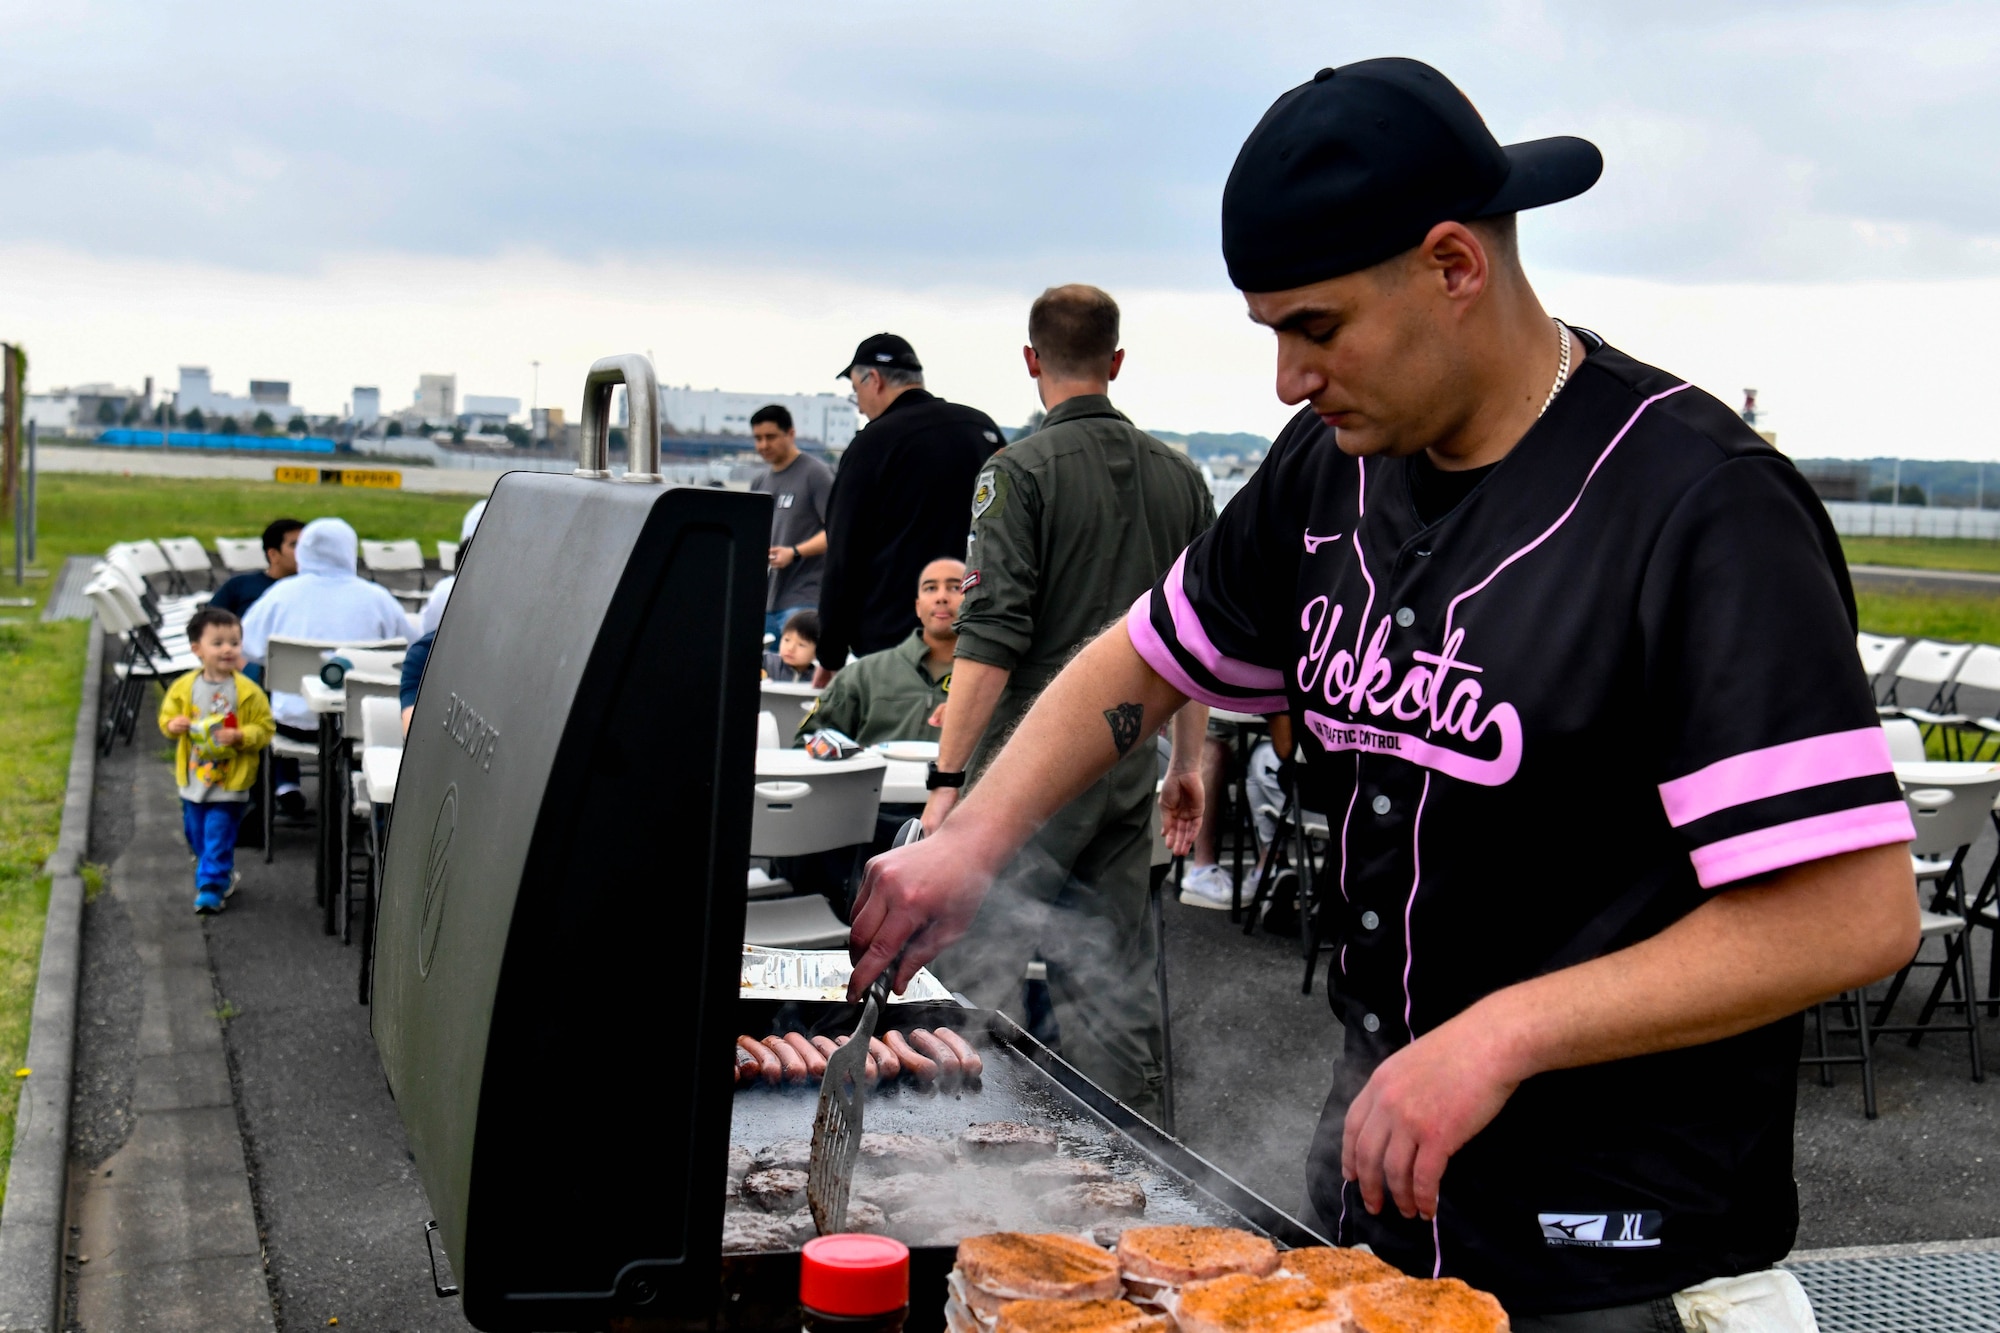 U.S. Air Force Master Sgt. Jonathon Parker, 374th Operations Support Squadron tower chief controller, cooks food on a grill.